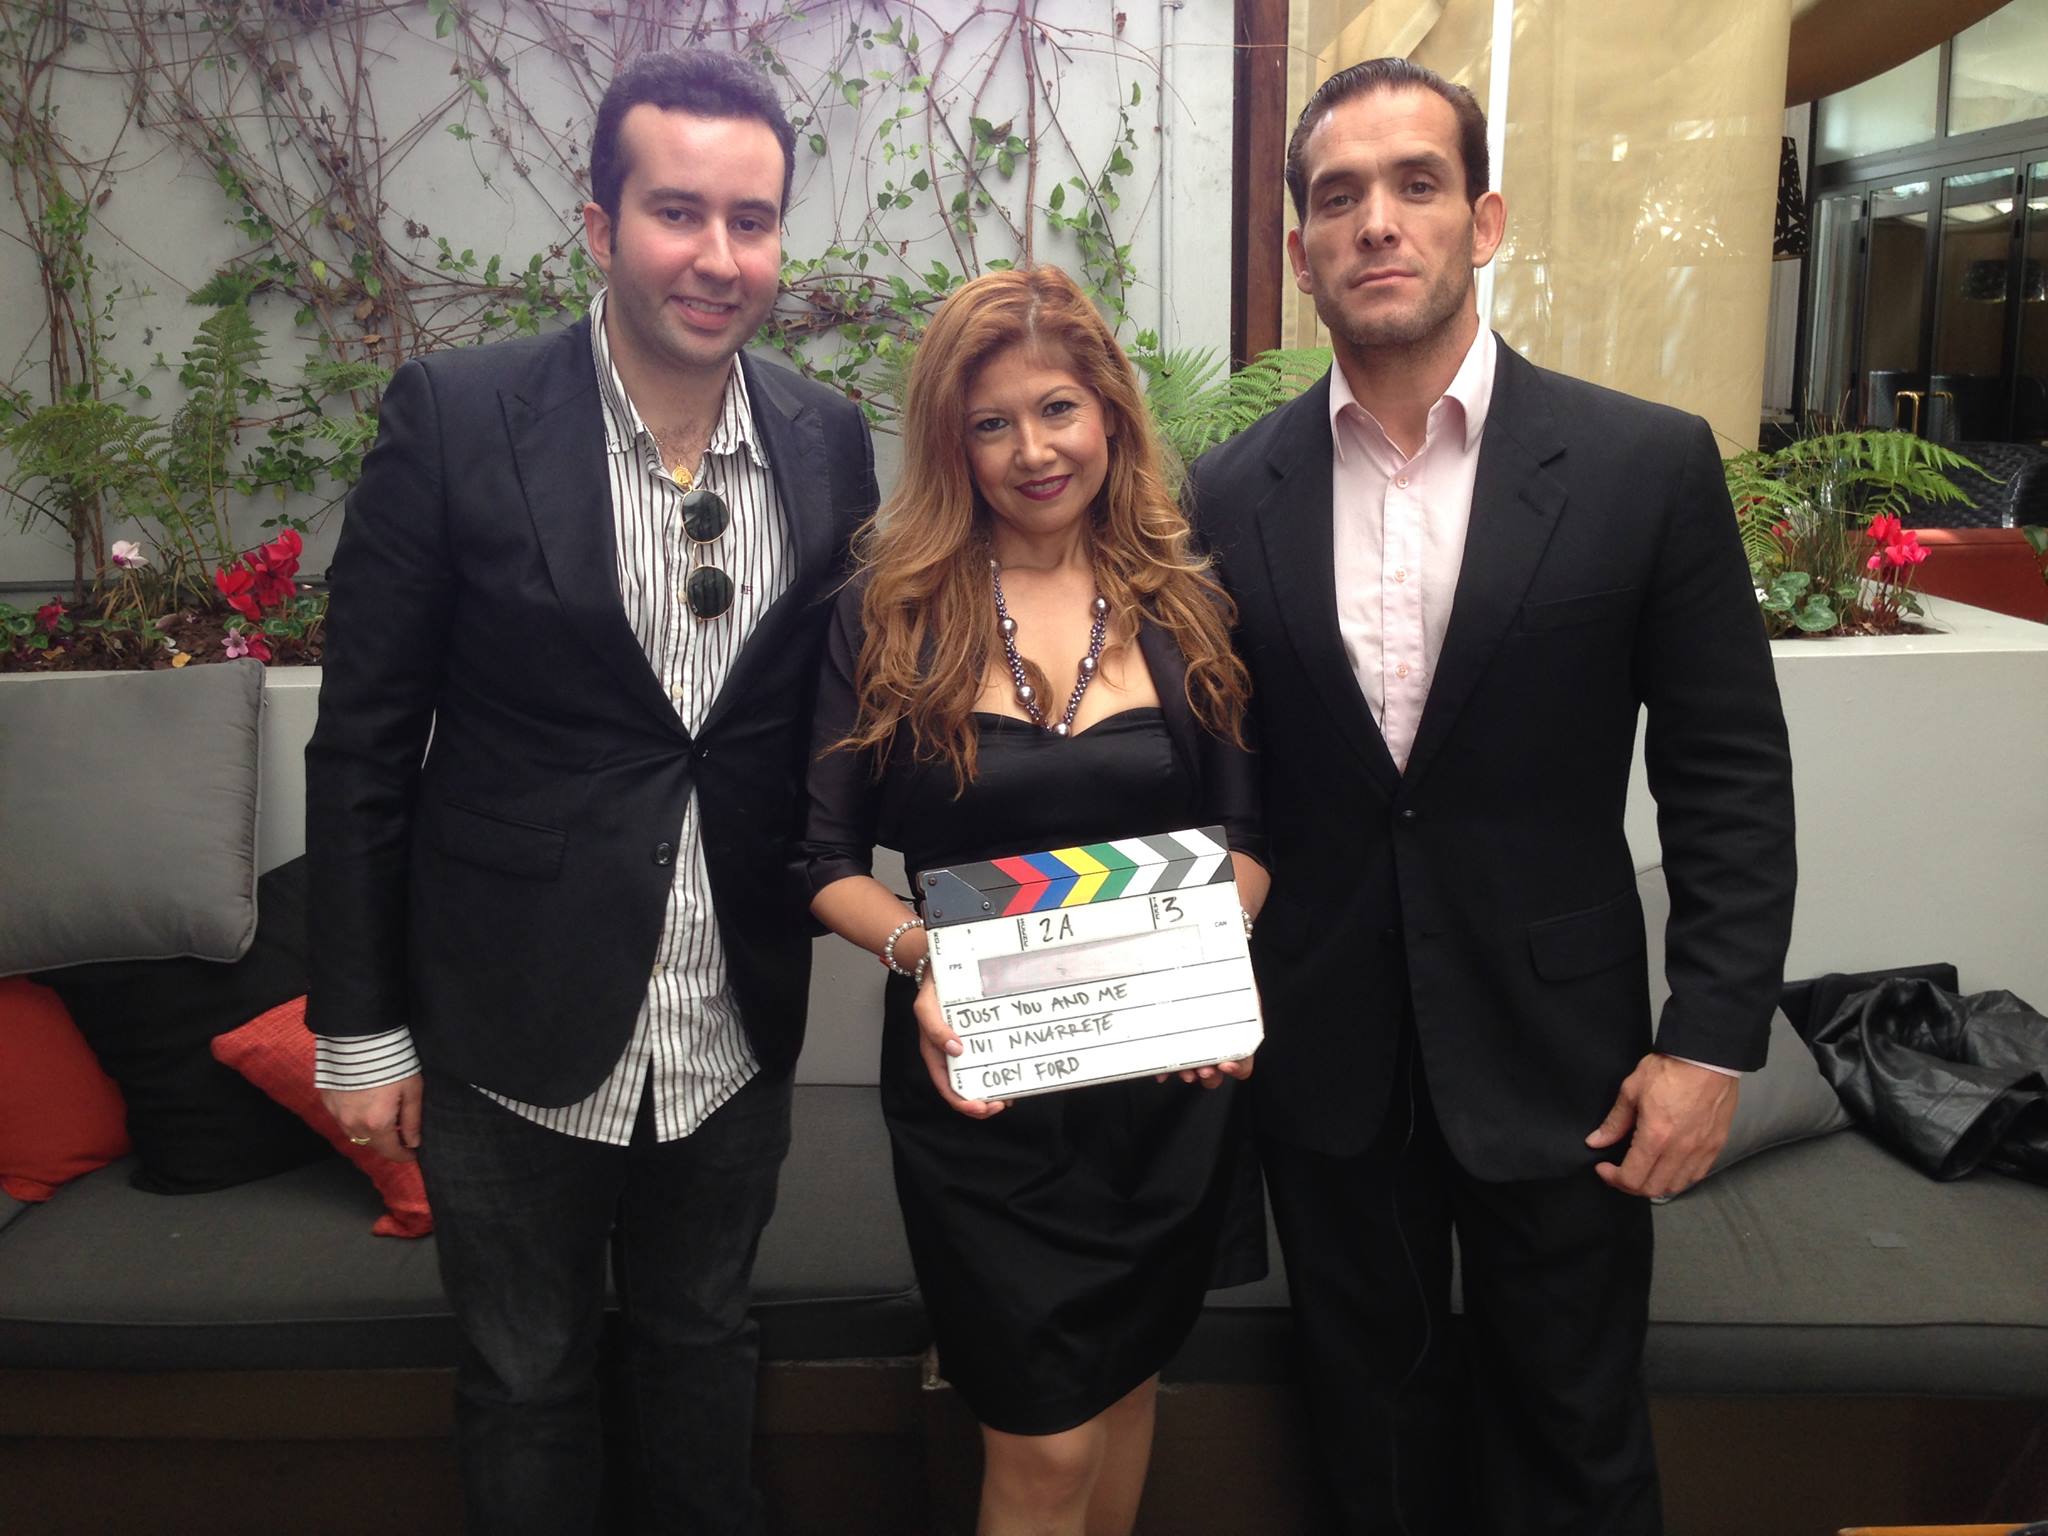 On set for the shooting of ''Just You And Me'', with movie director Ivi Nvarrete and actor Jose Rosete.